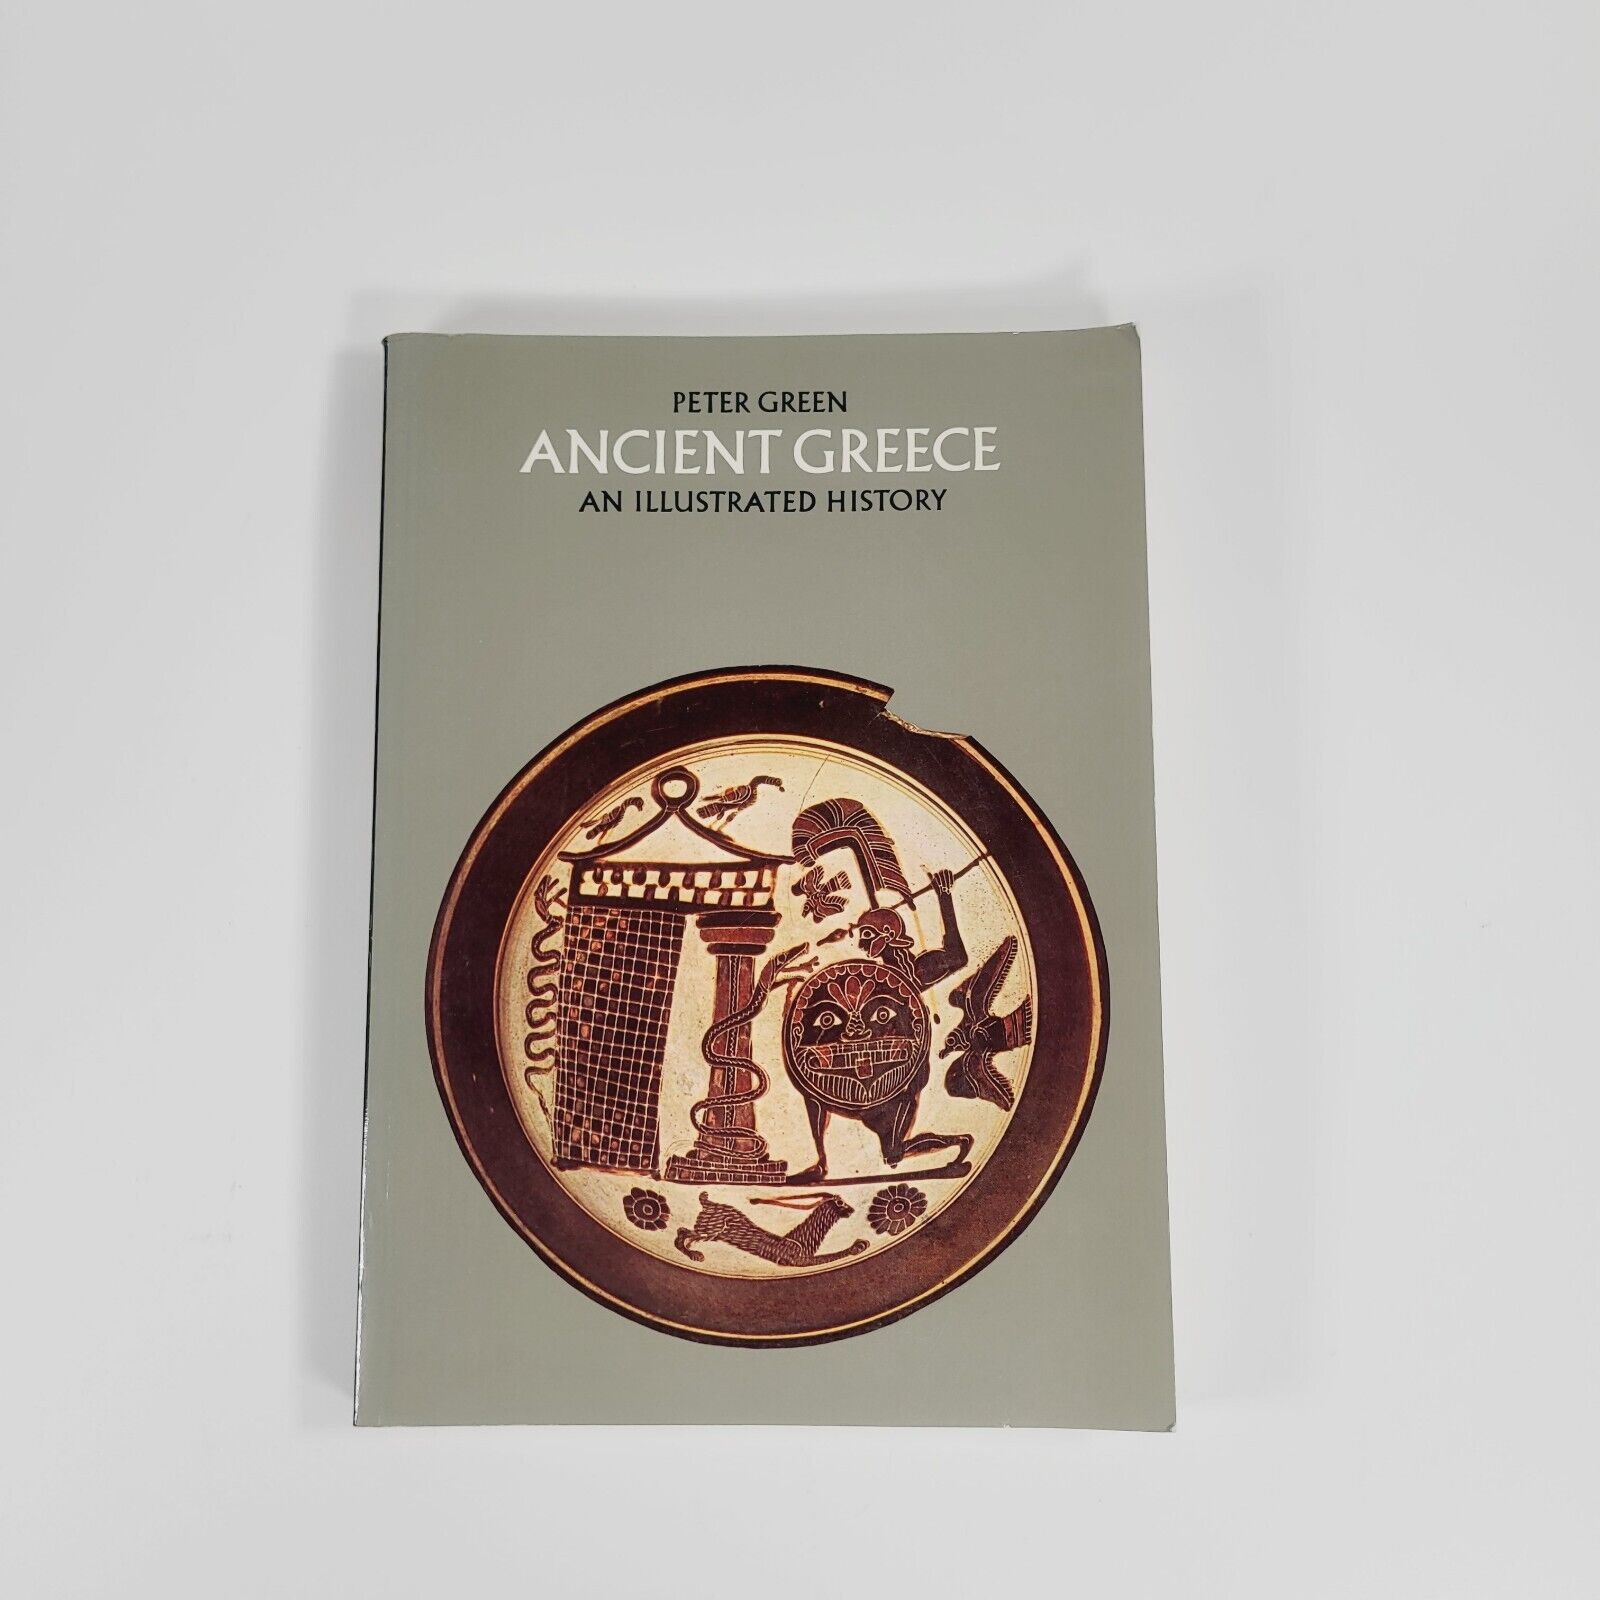 Ancient Greece : An Illustrated History by Peter Green (1989, Paperback)